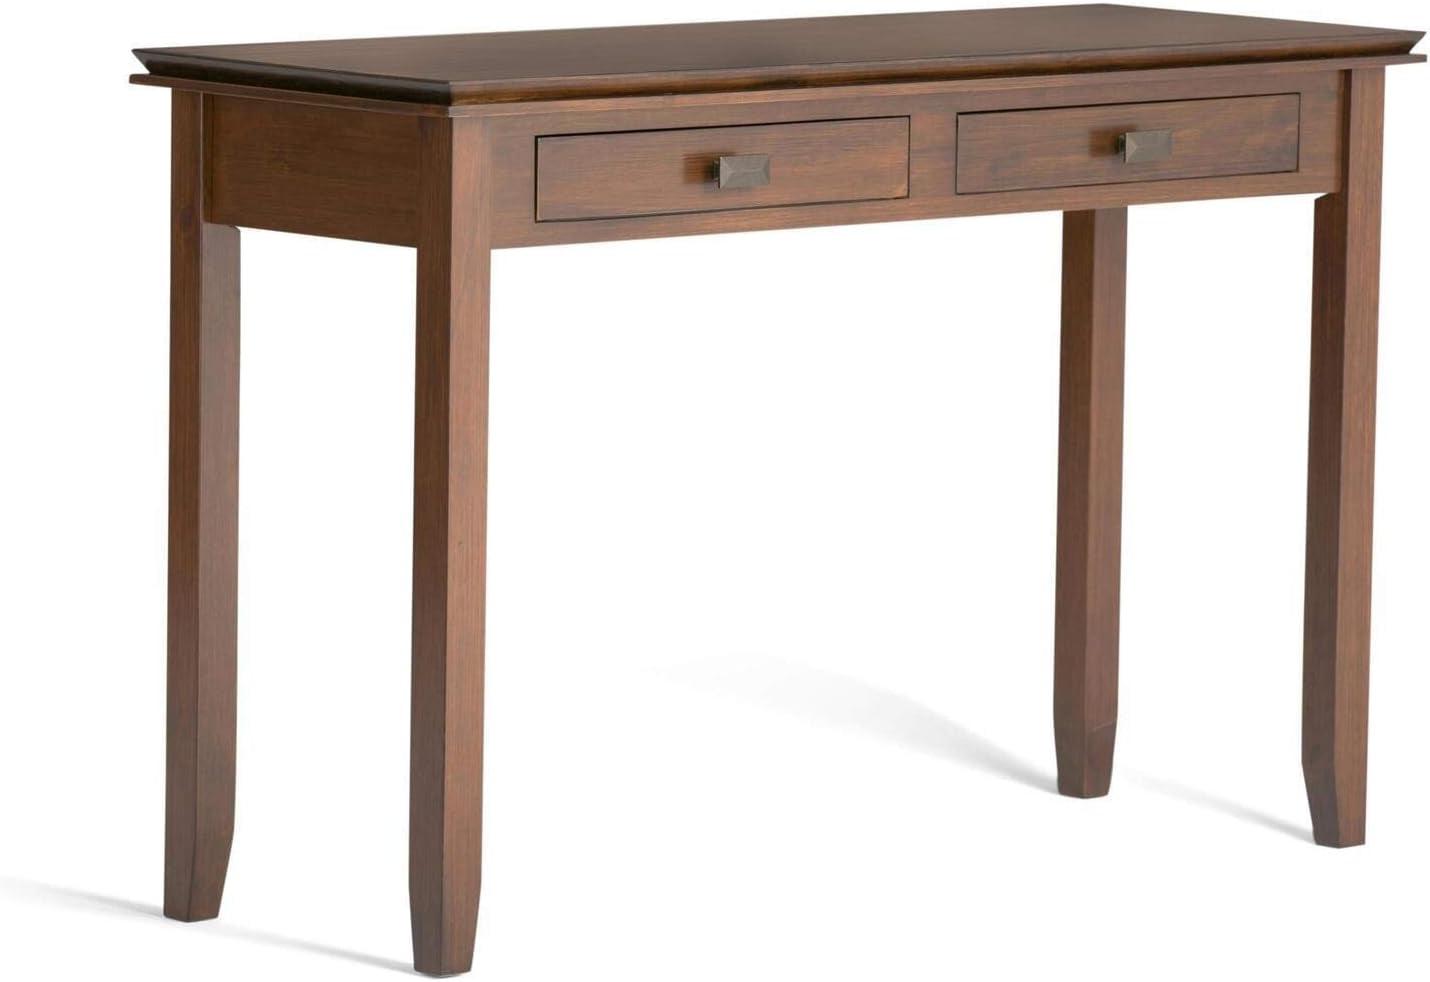 Artisan Transitional Solid Wood Console Table with Storage in Russet Brown